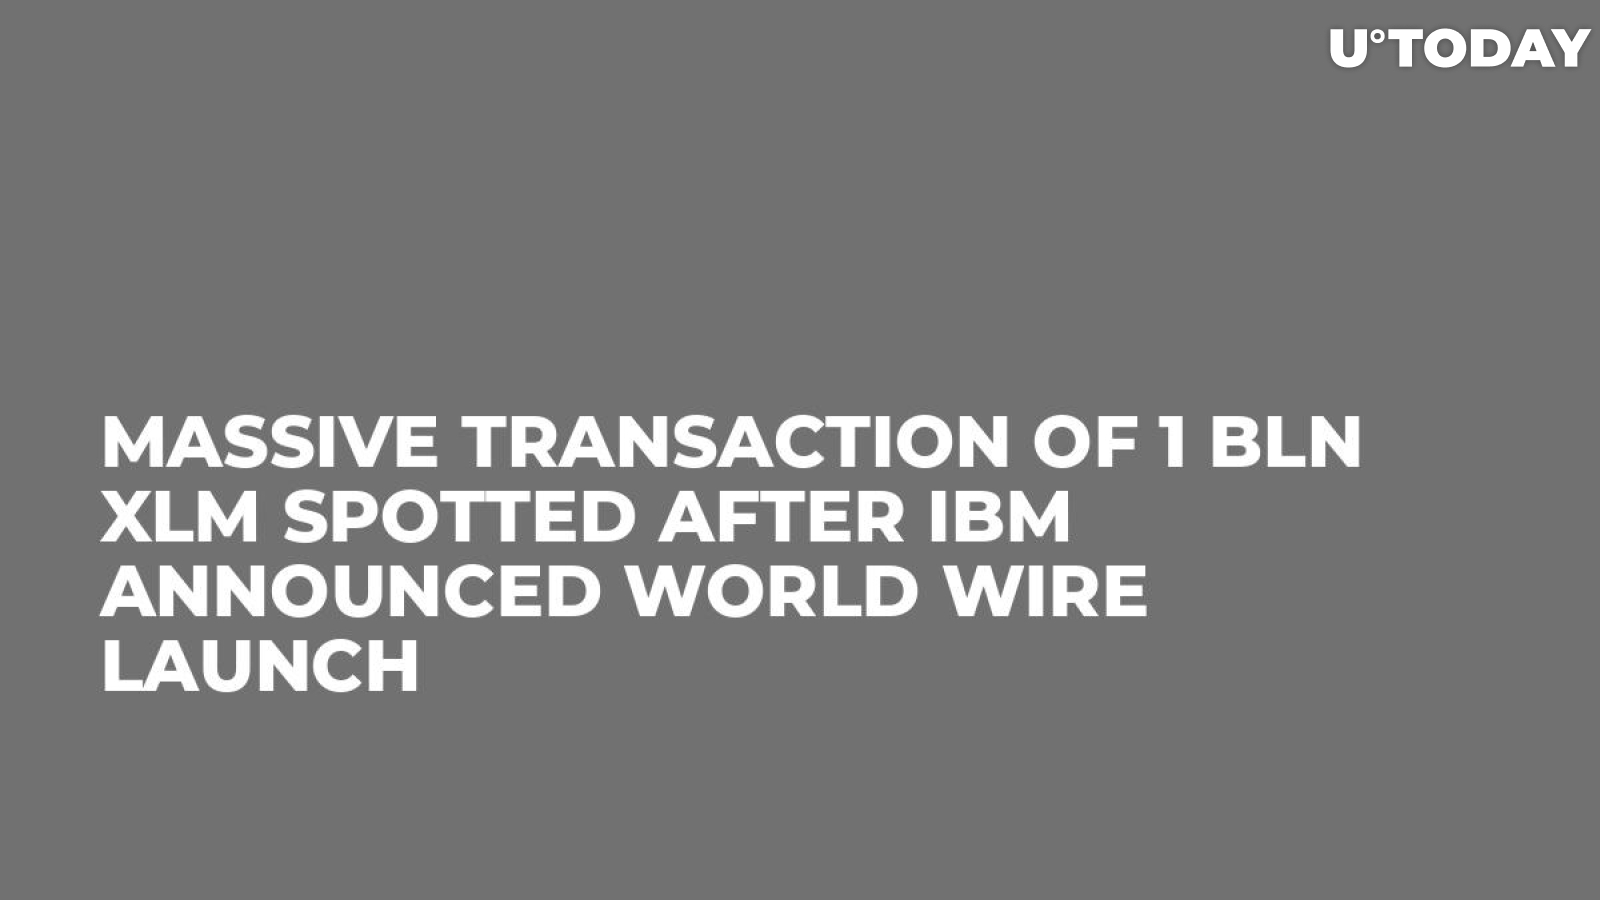 Massive Transaction of 1 Bln XLM Spotted After IBM Announced World Wire Launch